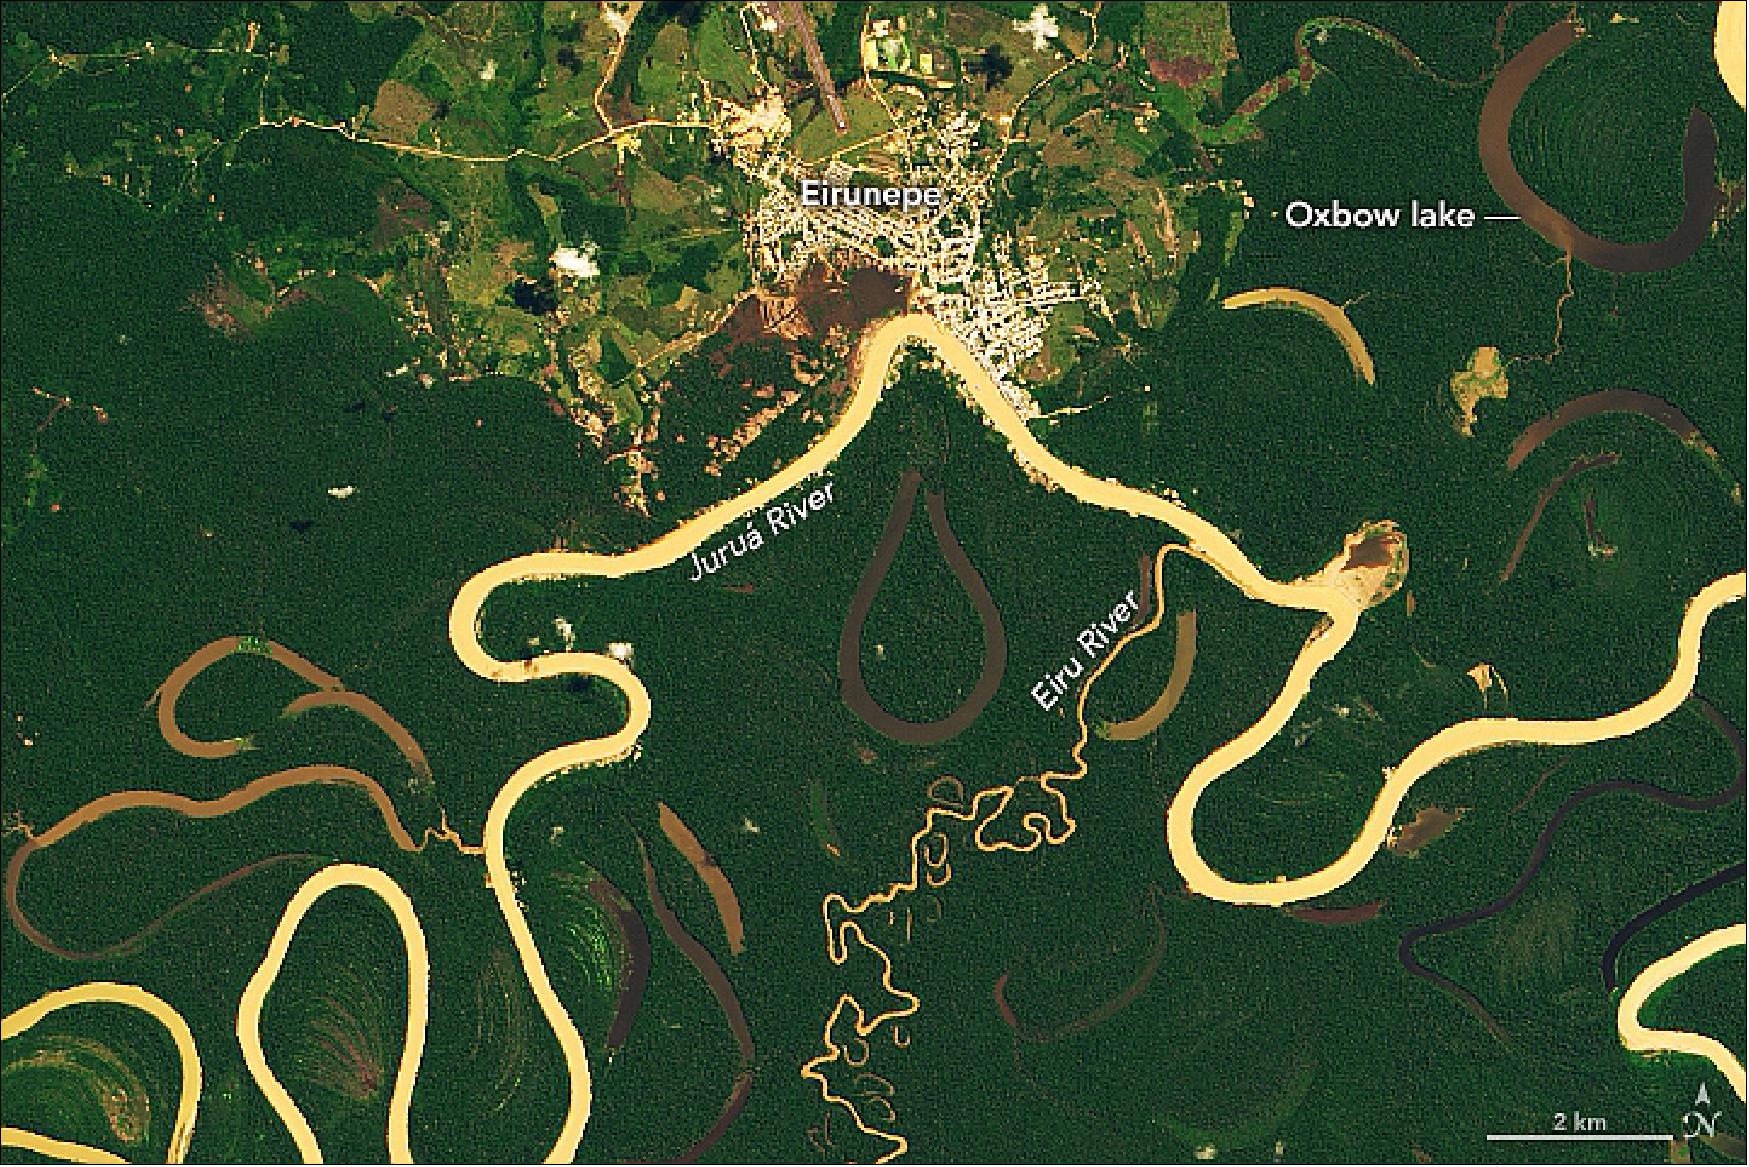 Figure 19: Meanders make up two thirds of the Juruá’s length, making it one of the most sinuous rivers in the Amazon Basin. On May 27, 2019, the Operational Land Imager (OLI) acquired this image of a stretch near Eirunepé, a settlement established in the 1800s as a hub for rubber production. A semicircle of land has been cleared around the city (light green), probably for ranching. Buildings and roads (white) are clustered along the river, which flows through seasonally flooded wetland forests known as várzea (dark green), image credit: NASA Earth Observatory, image by Lauren Dauphin, using Landsat data from the U.S. Geological Survey. Story by Adam Voiland